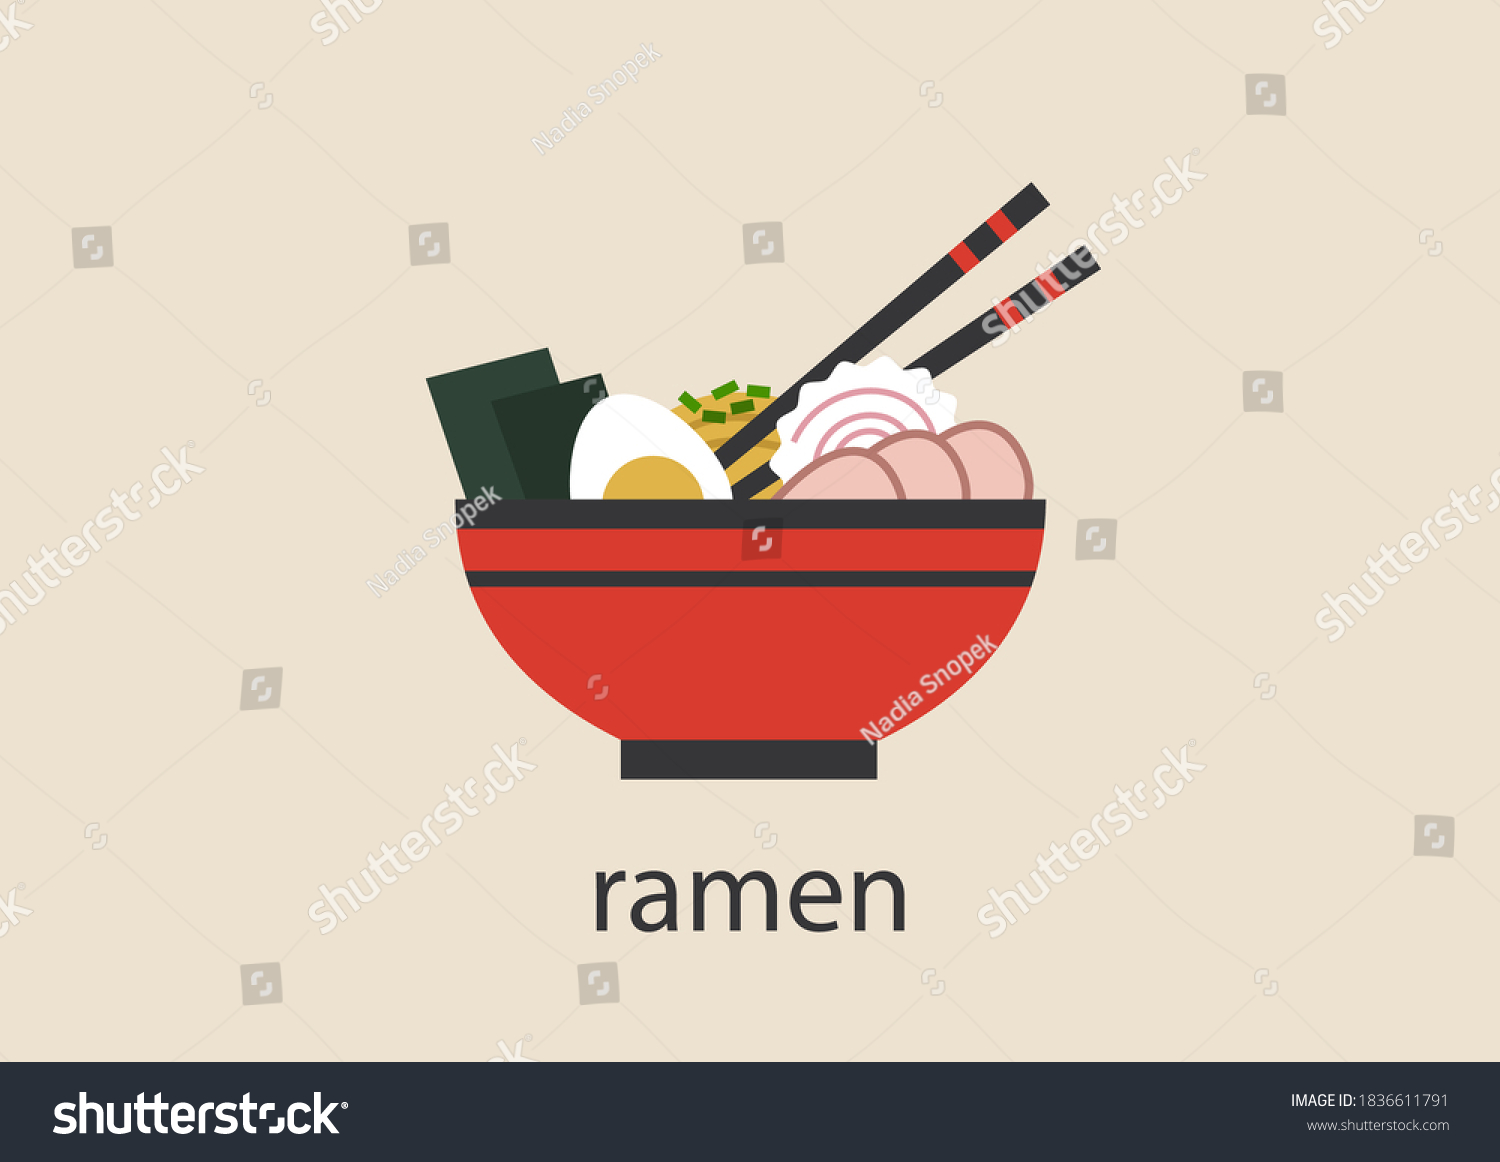 SVG of A bowl of hot Japanese ramen soup with noodles, boiled egg, nori seaweed, naruto swirl, pork, and a pair of chopsticks svg